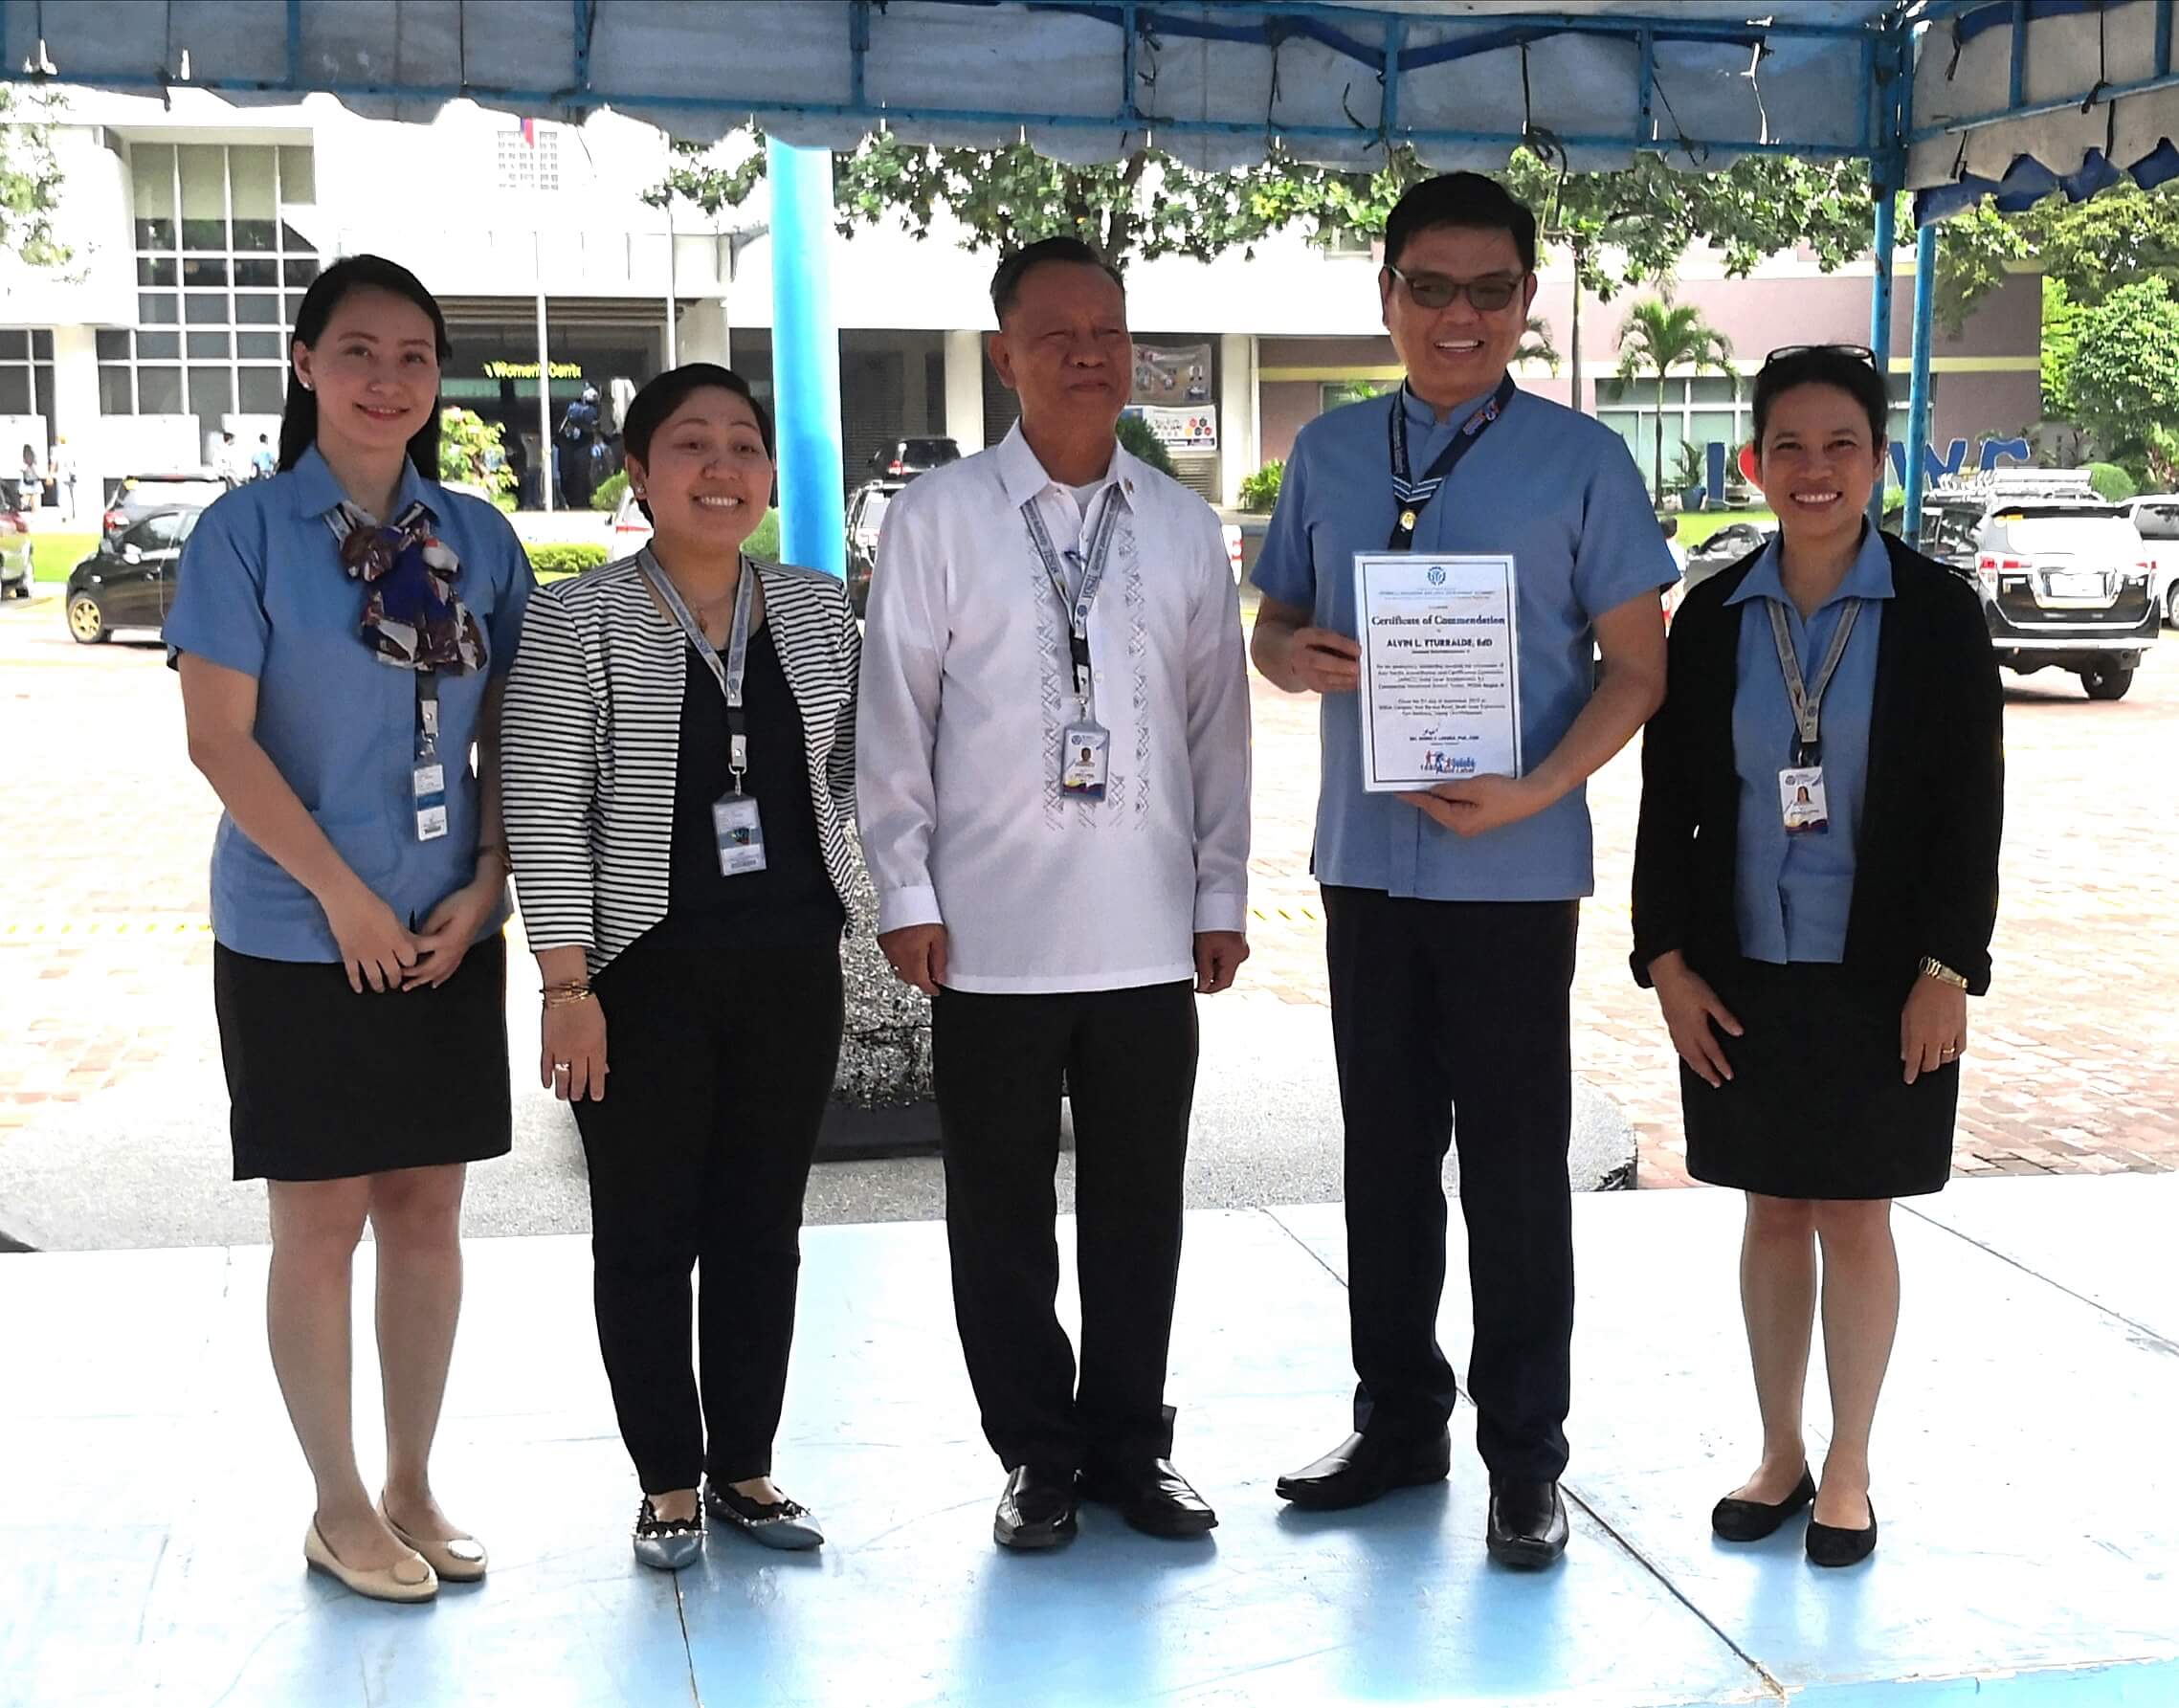 CVS Administrator Receives Commendation from TESDA